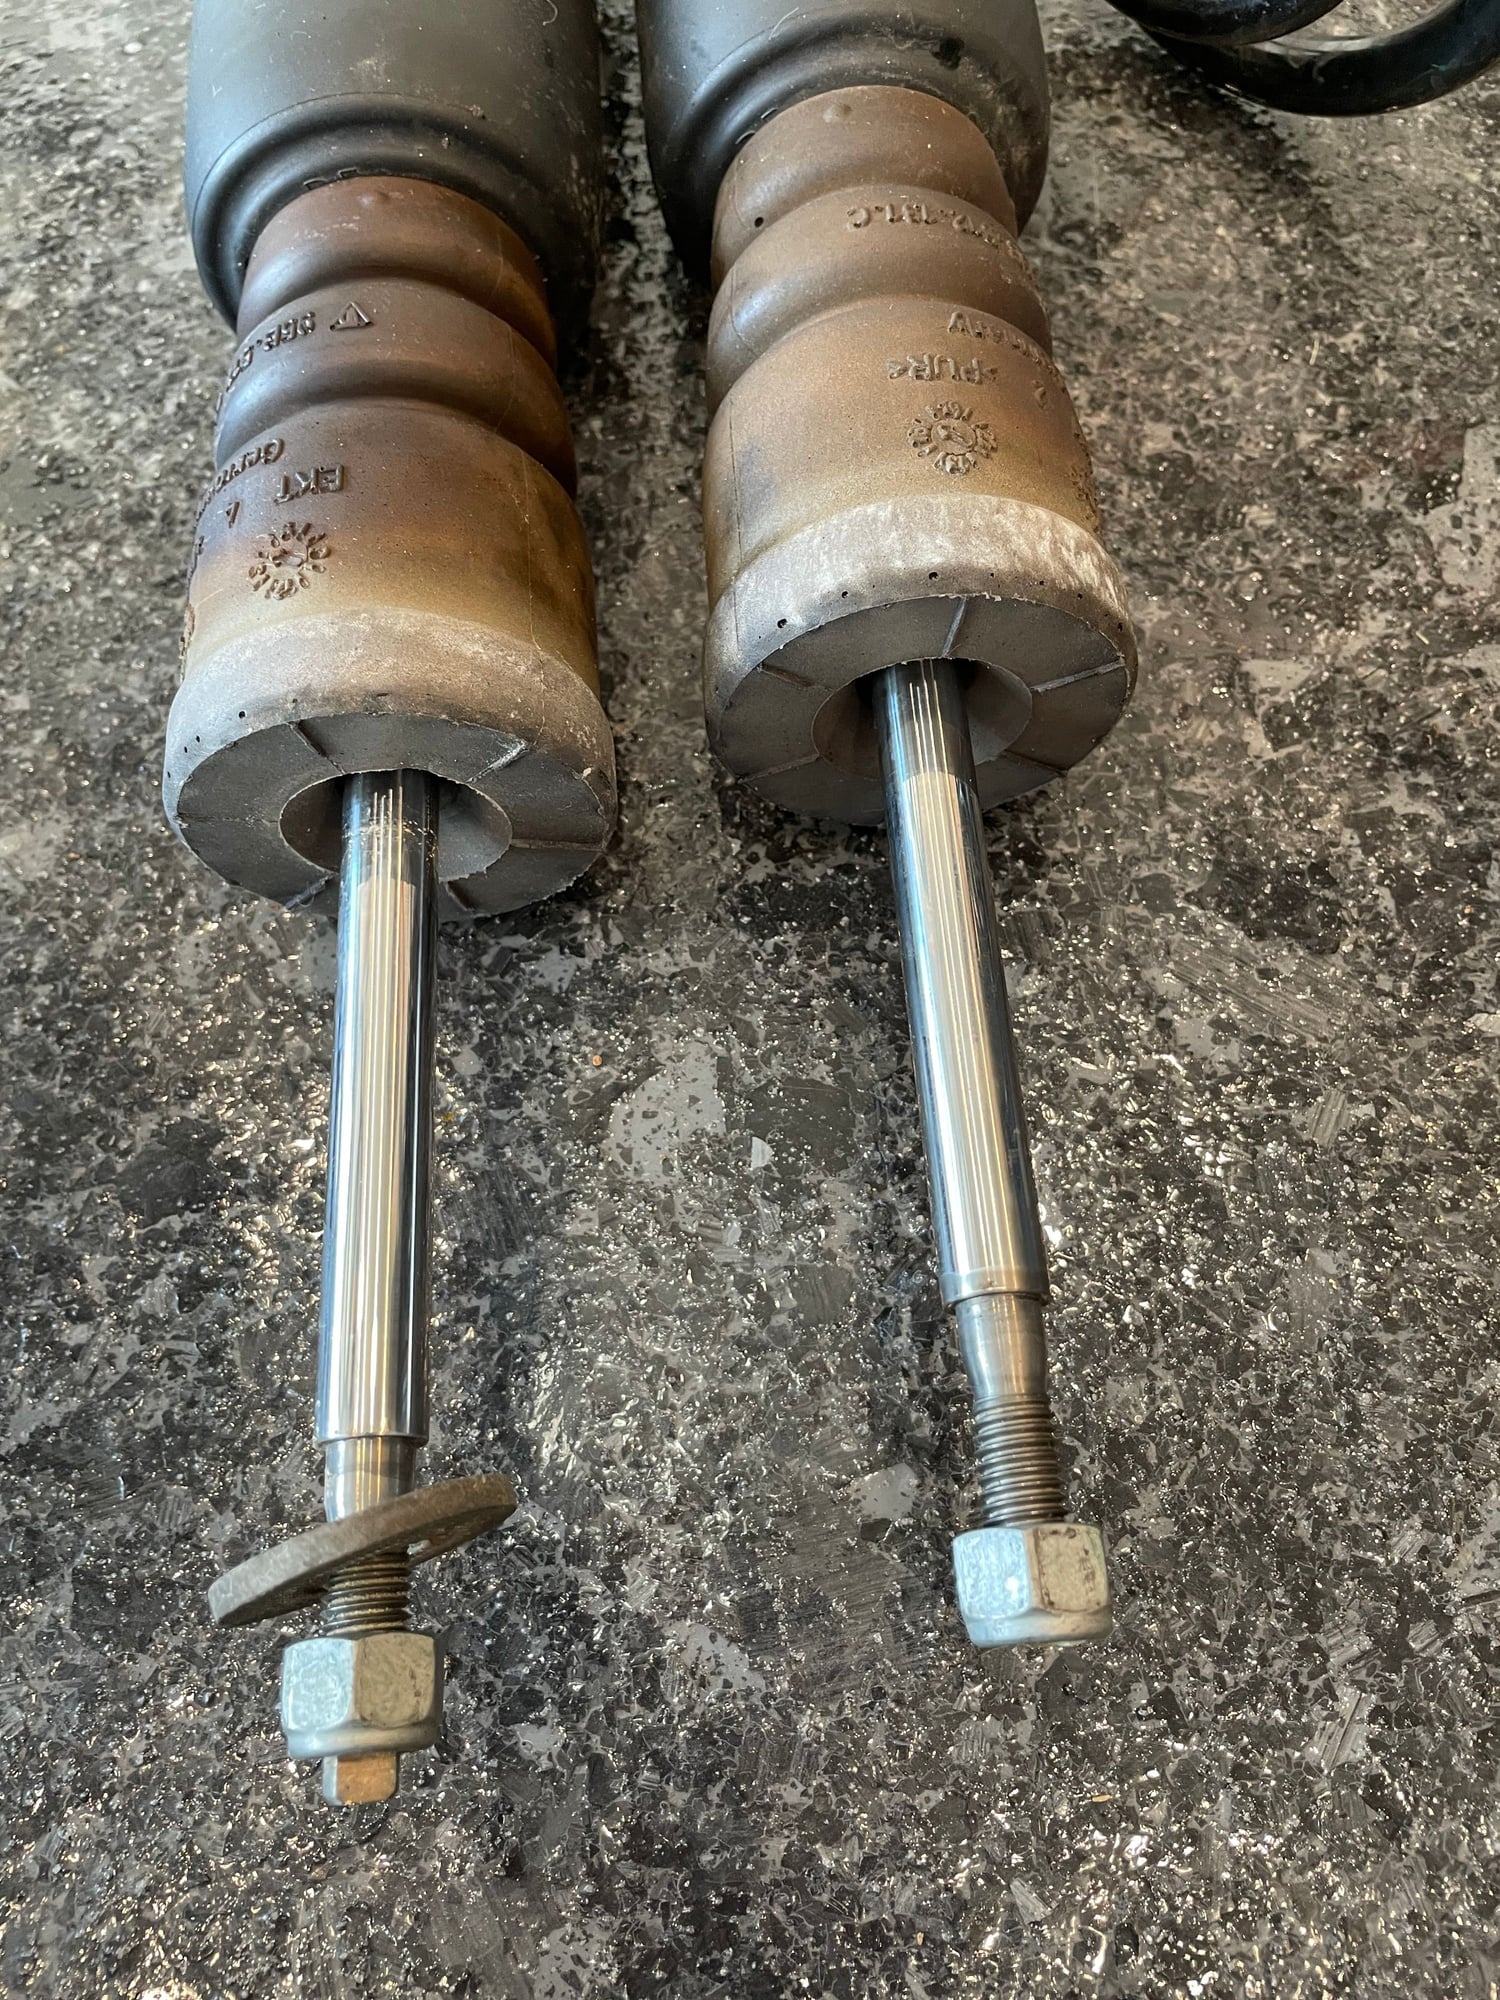 Steering/Suspension - 2017 Porsche Macan - Complete Base suspension (struts, springs, bumpers) - FREE SHIP! - Used - 2015 to 2019 Porsche Macan - St. Louis, MO 63122, United States